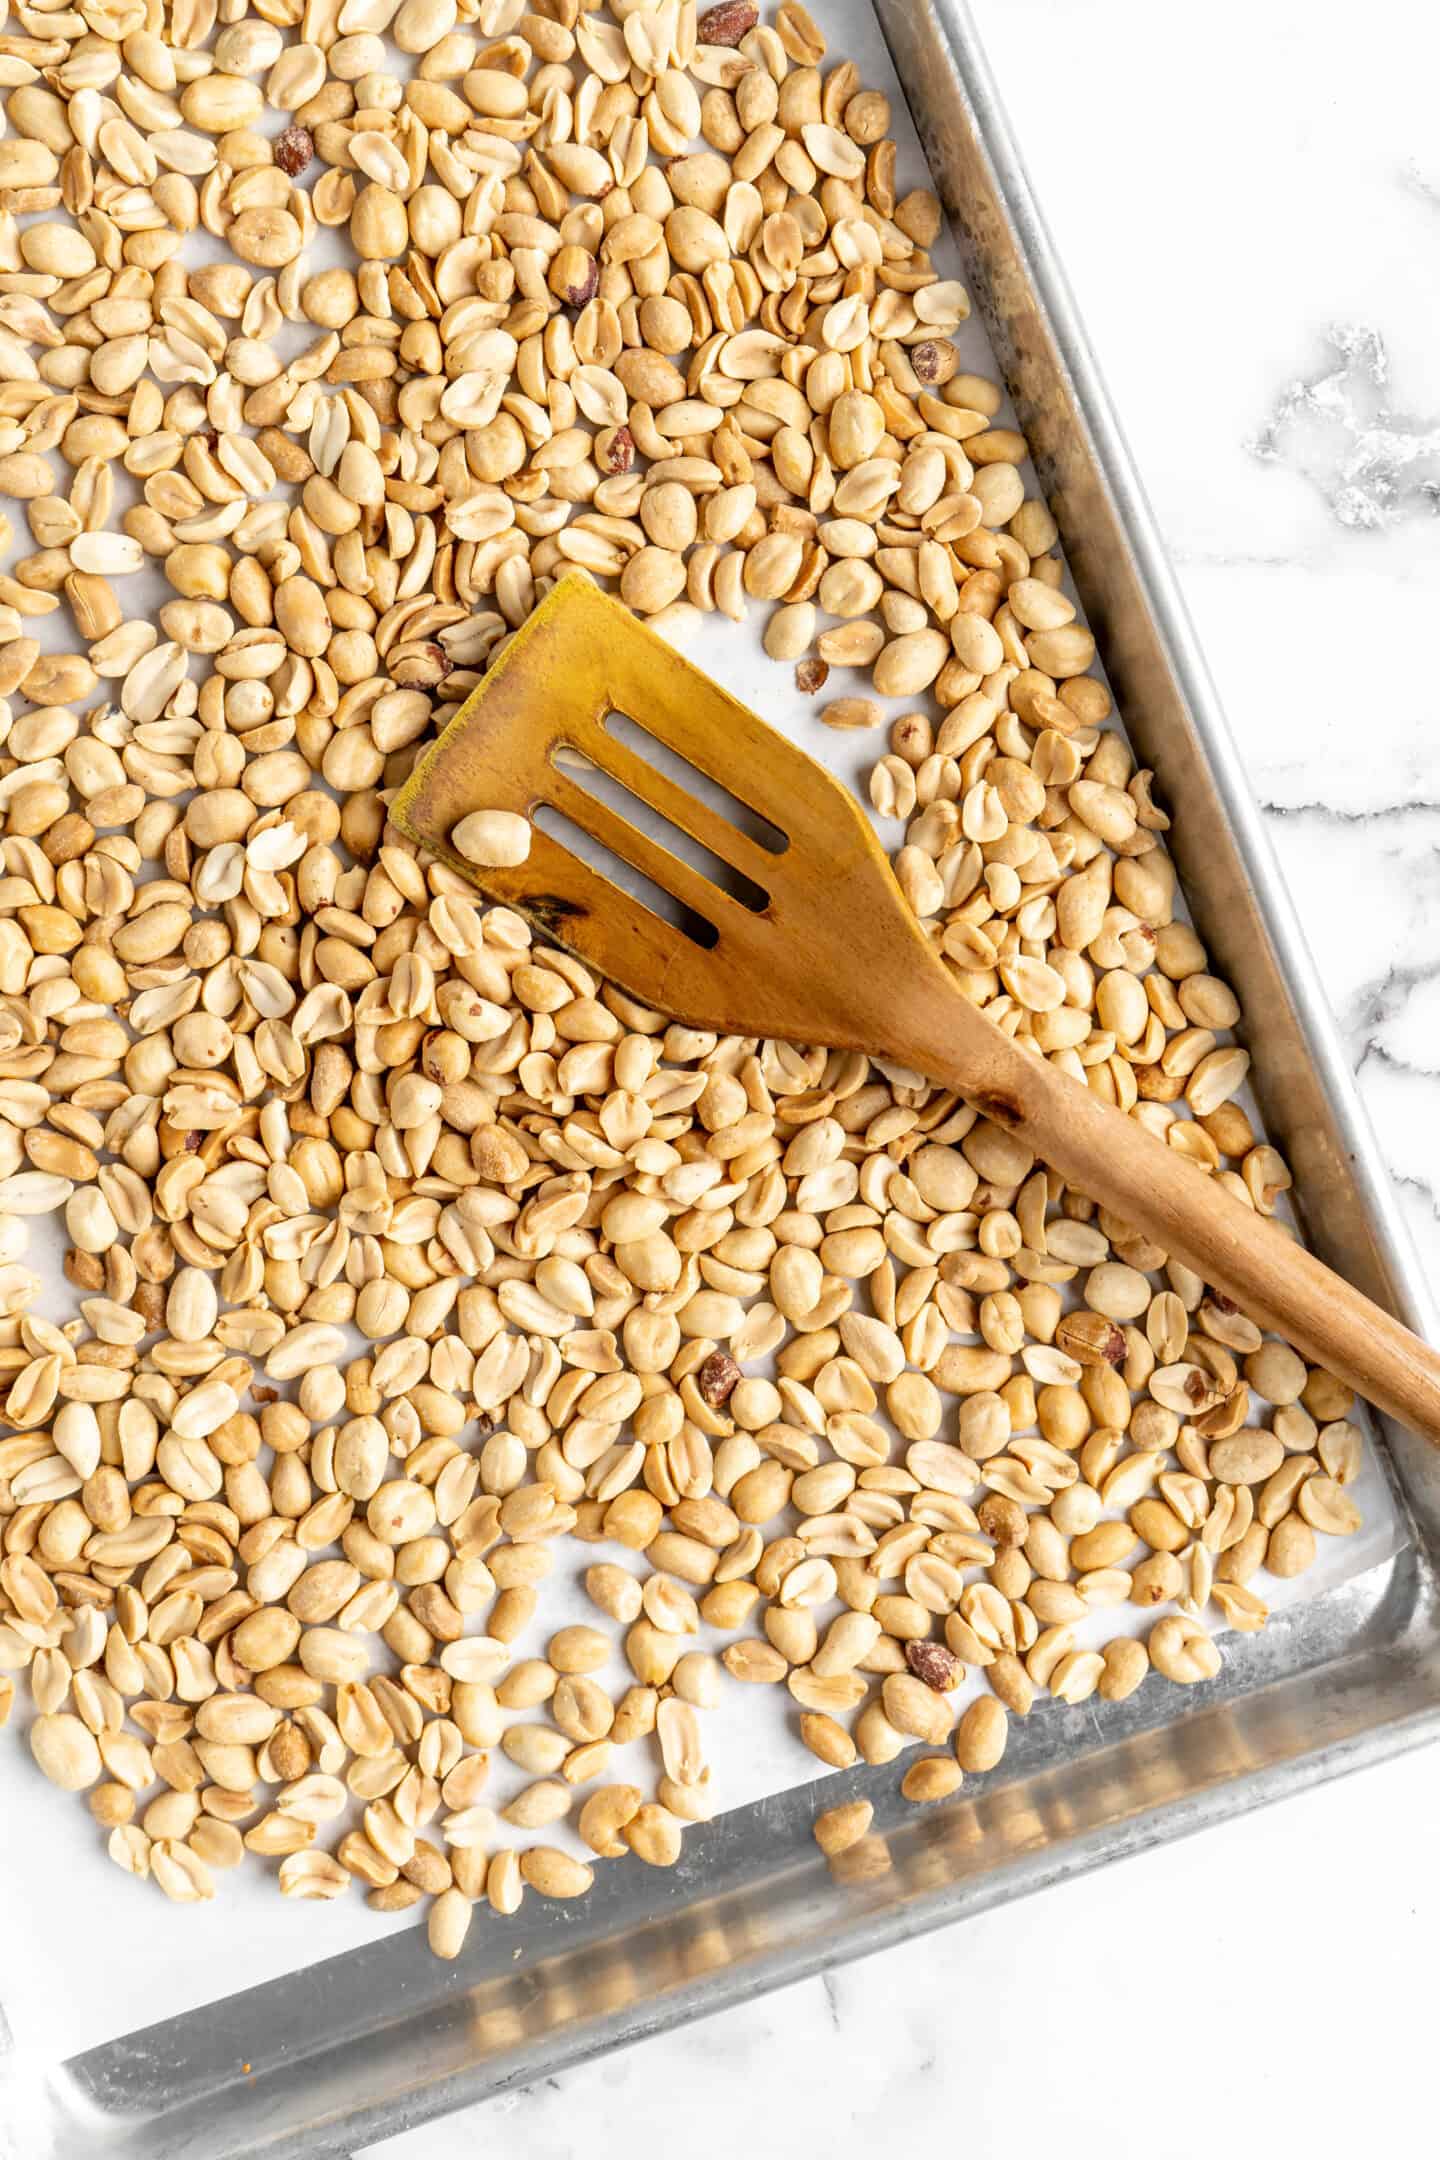 Overhead view of peanuts on baking sheet with wooden spatula